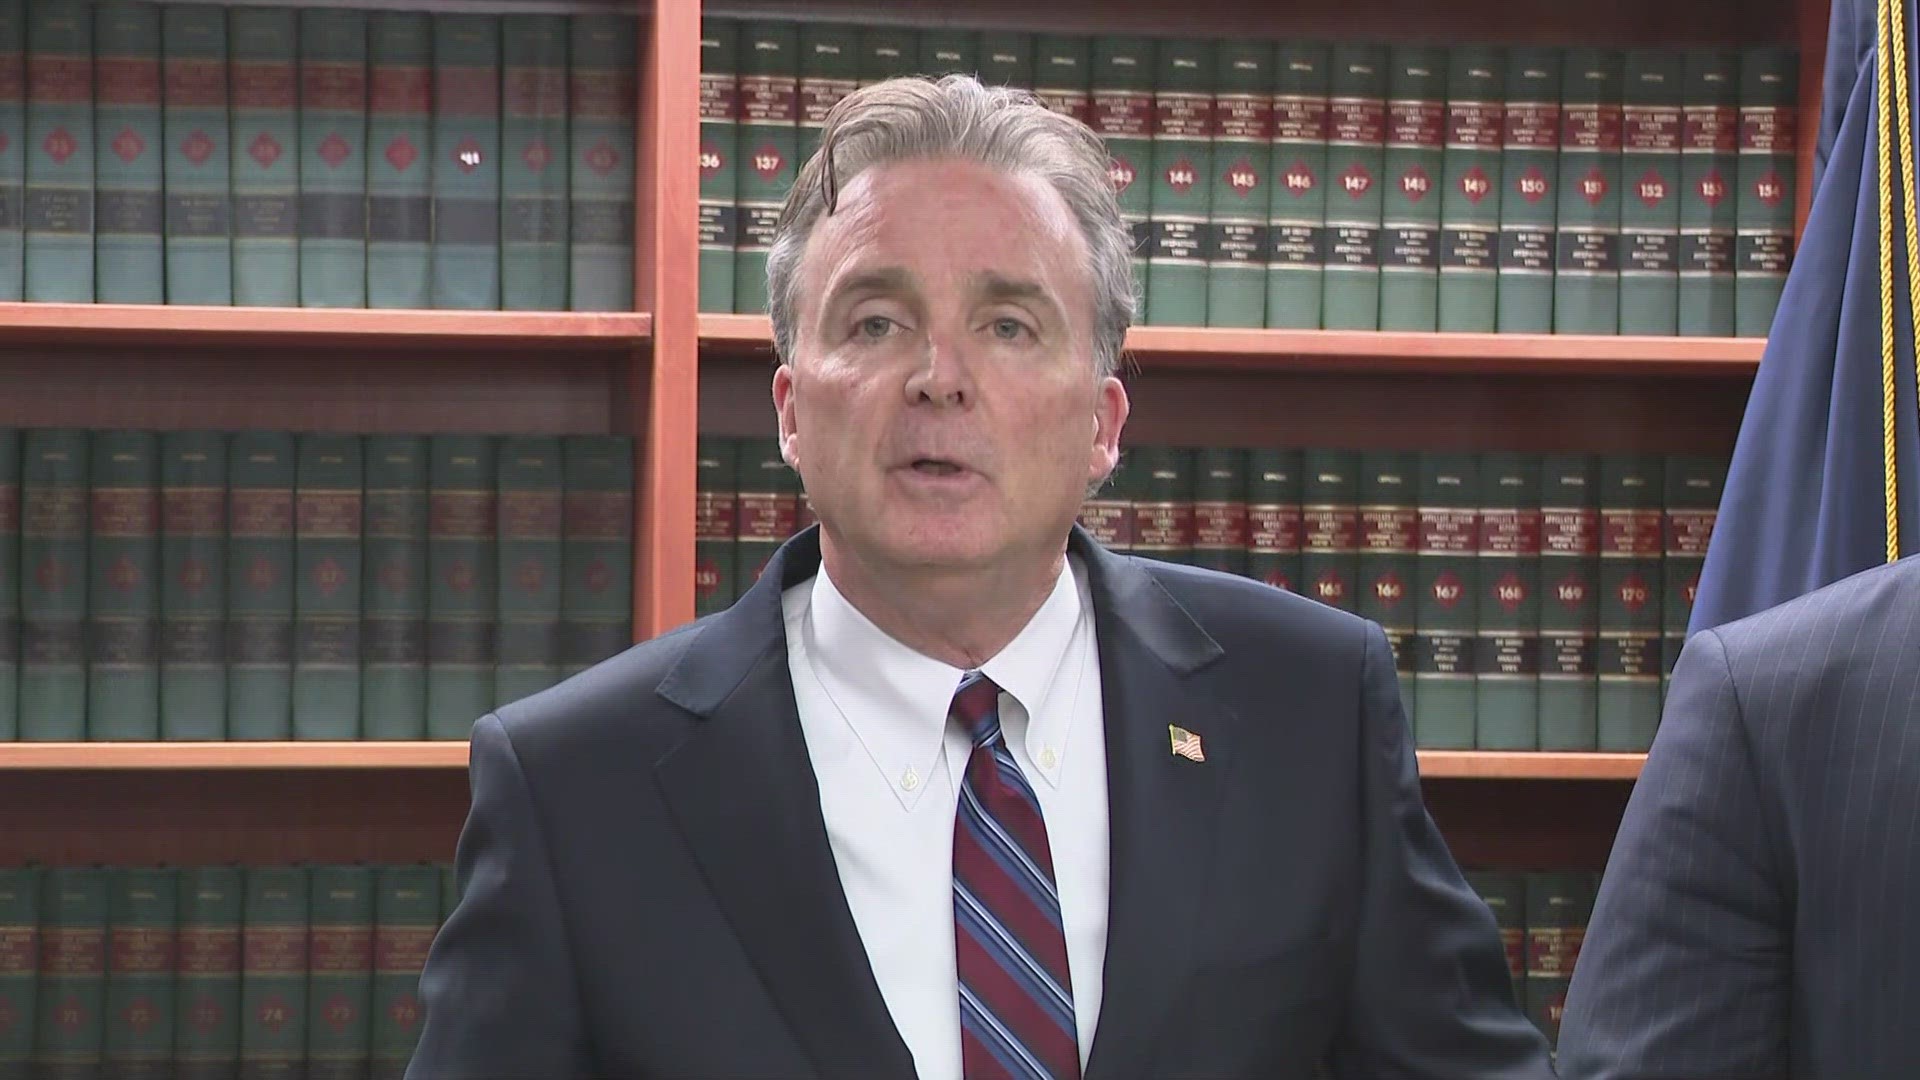 A guilty verdict was handed down in the murder of woman in Tonawanda and two victims in the City of Buffalo, Erie County DA Mike Keane said Wednesday.